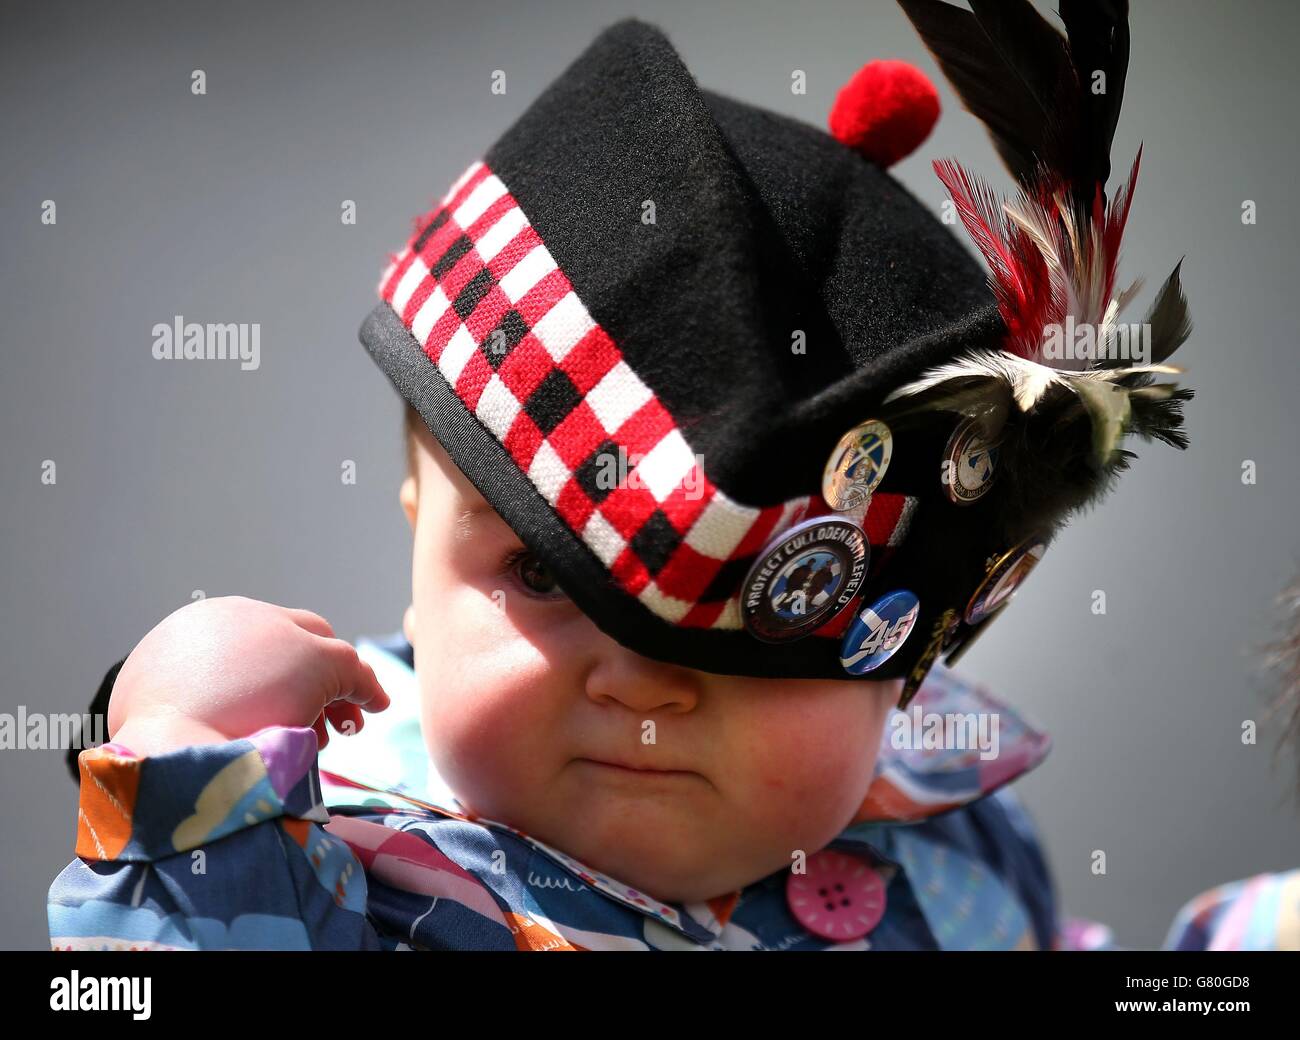 10-month-old Mollie Kempik attends the unveiling of a memorial at the site of the 'Braveheart battle', where William Wallace and Andrew de Moray led Scotland to victory at the Battle of Stirling Bridge in 1297. Stock Photo